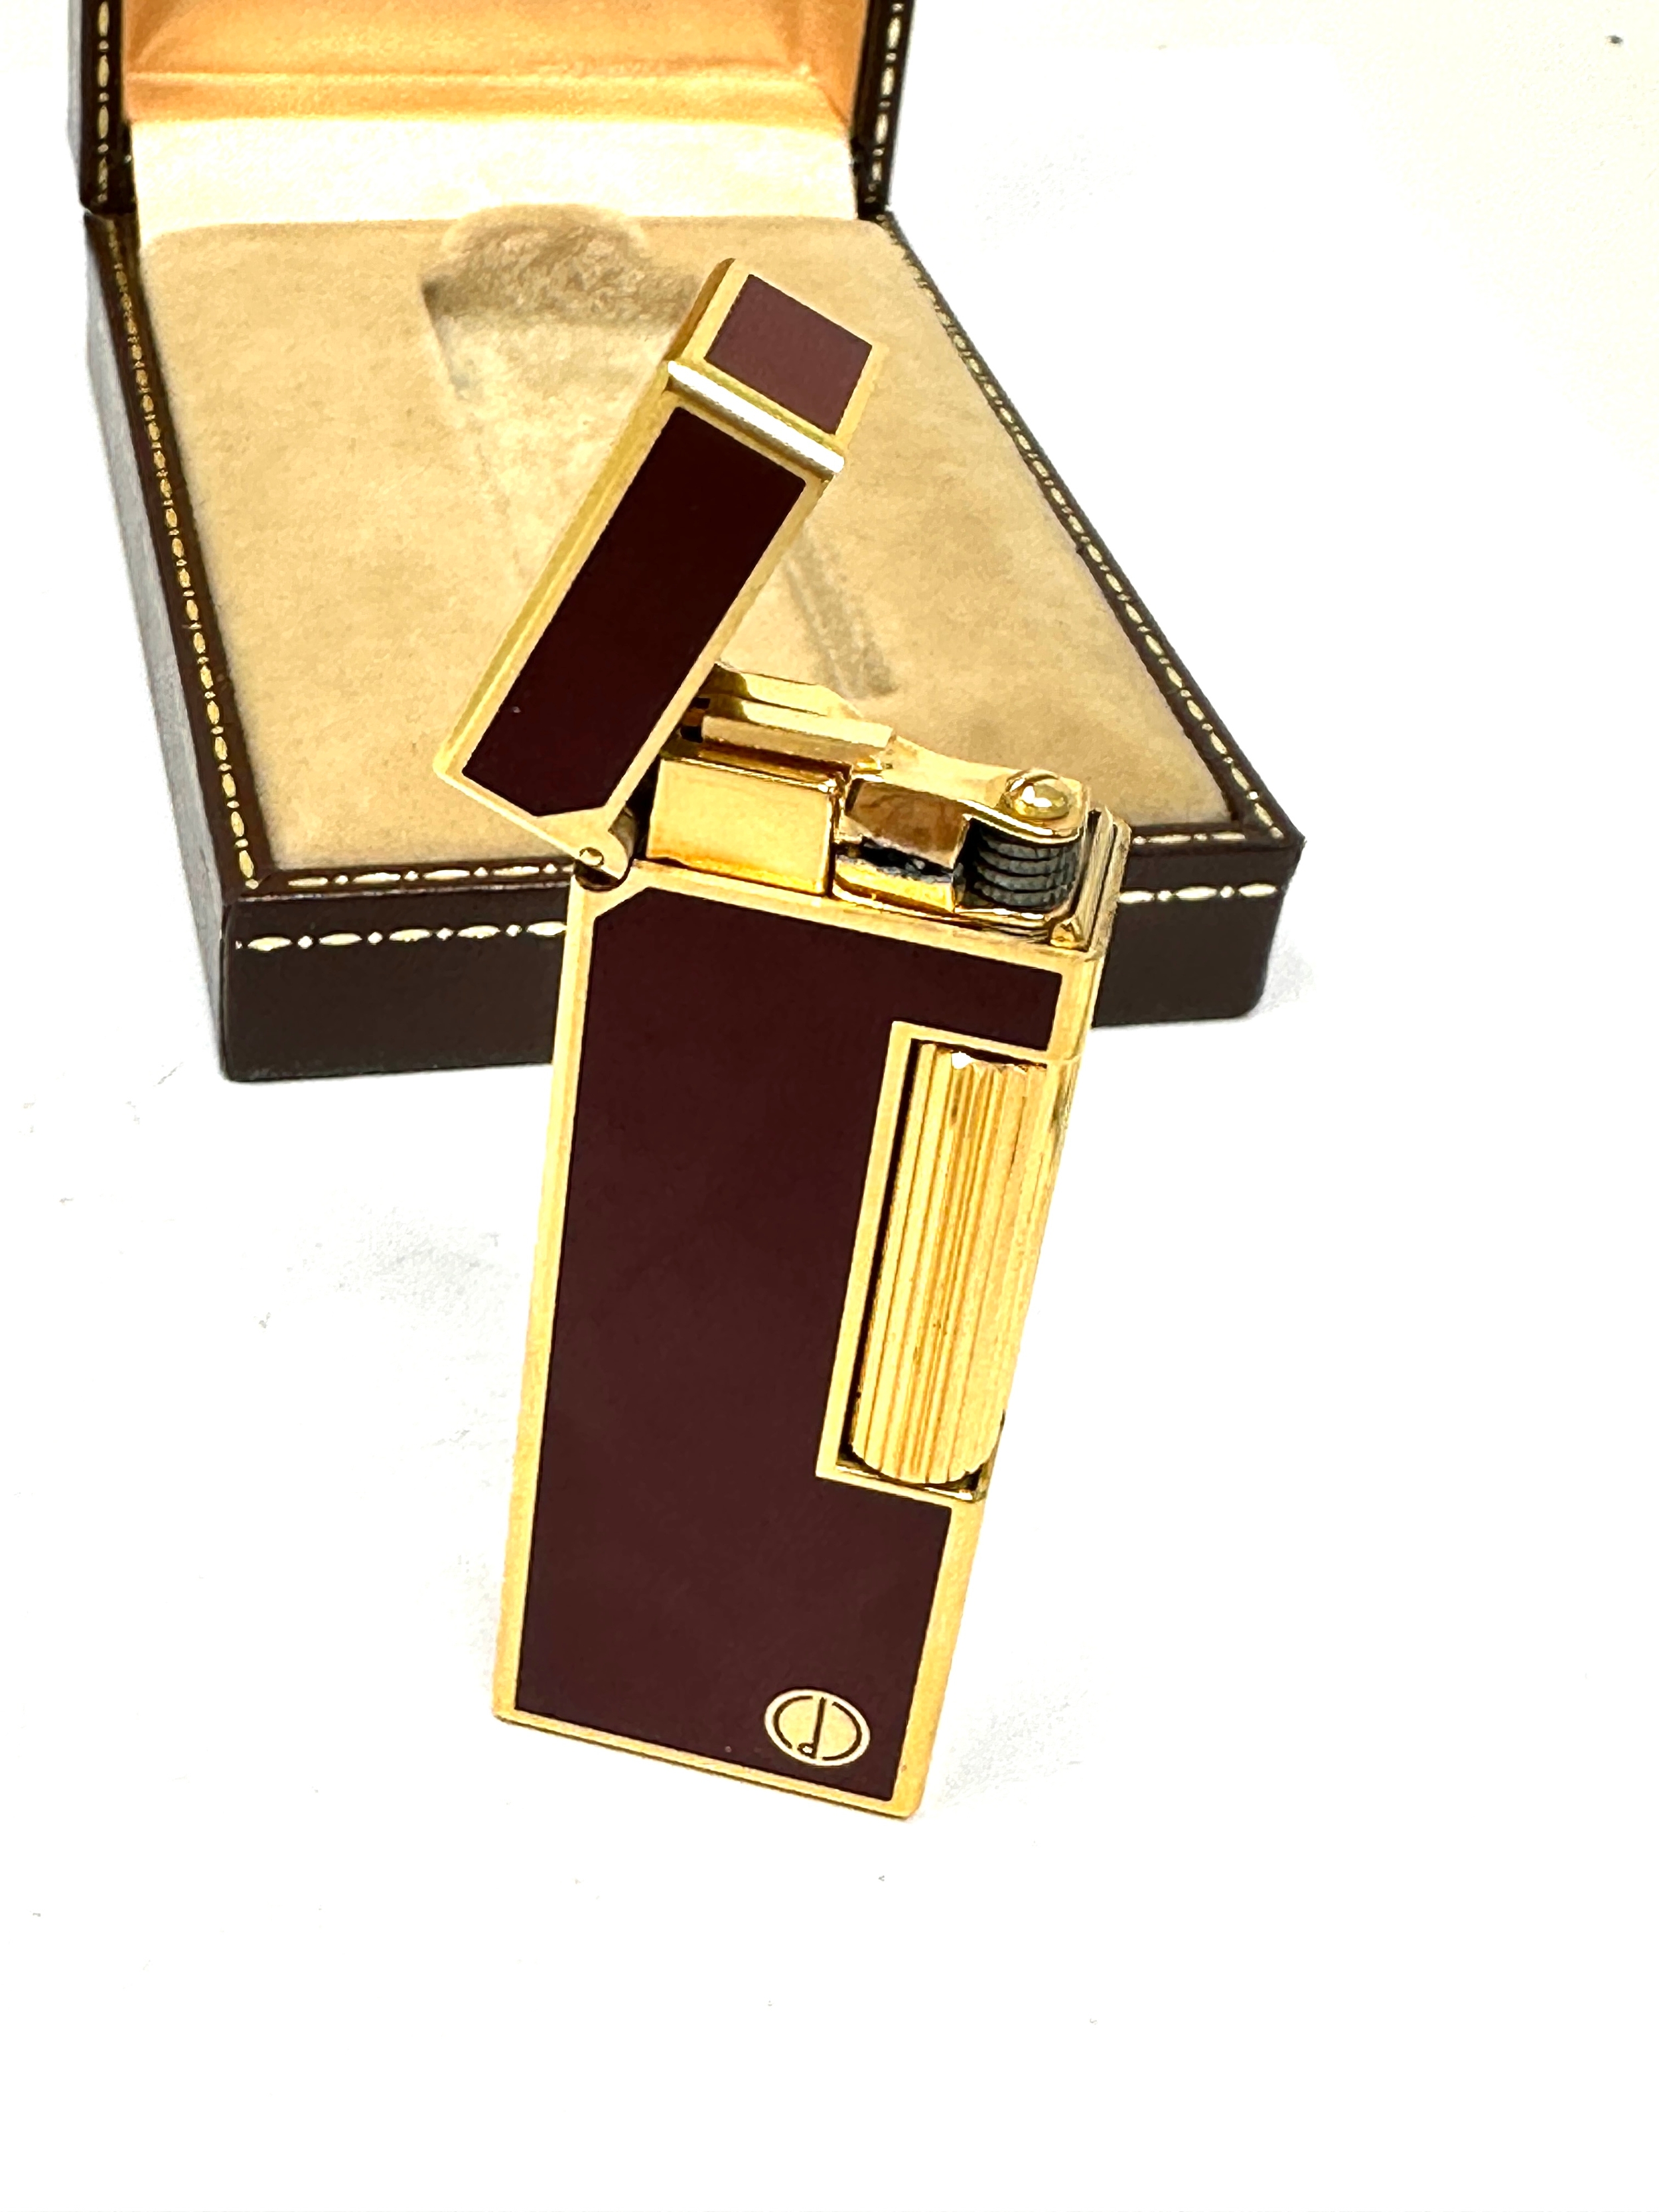 Boxed Dunhill Red Laquer Enamel Rollagas Lighter US.RE 24163 - Image 2 of 9